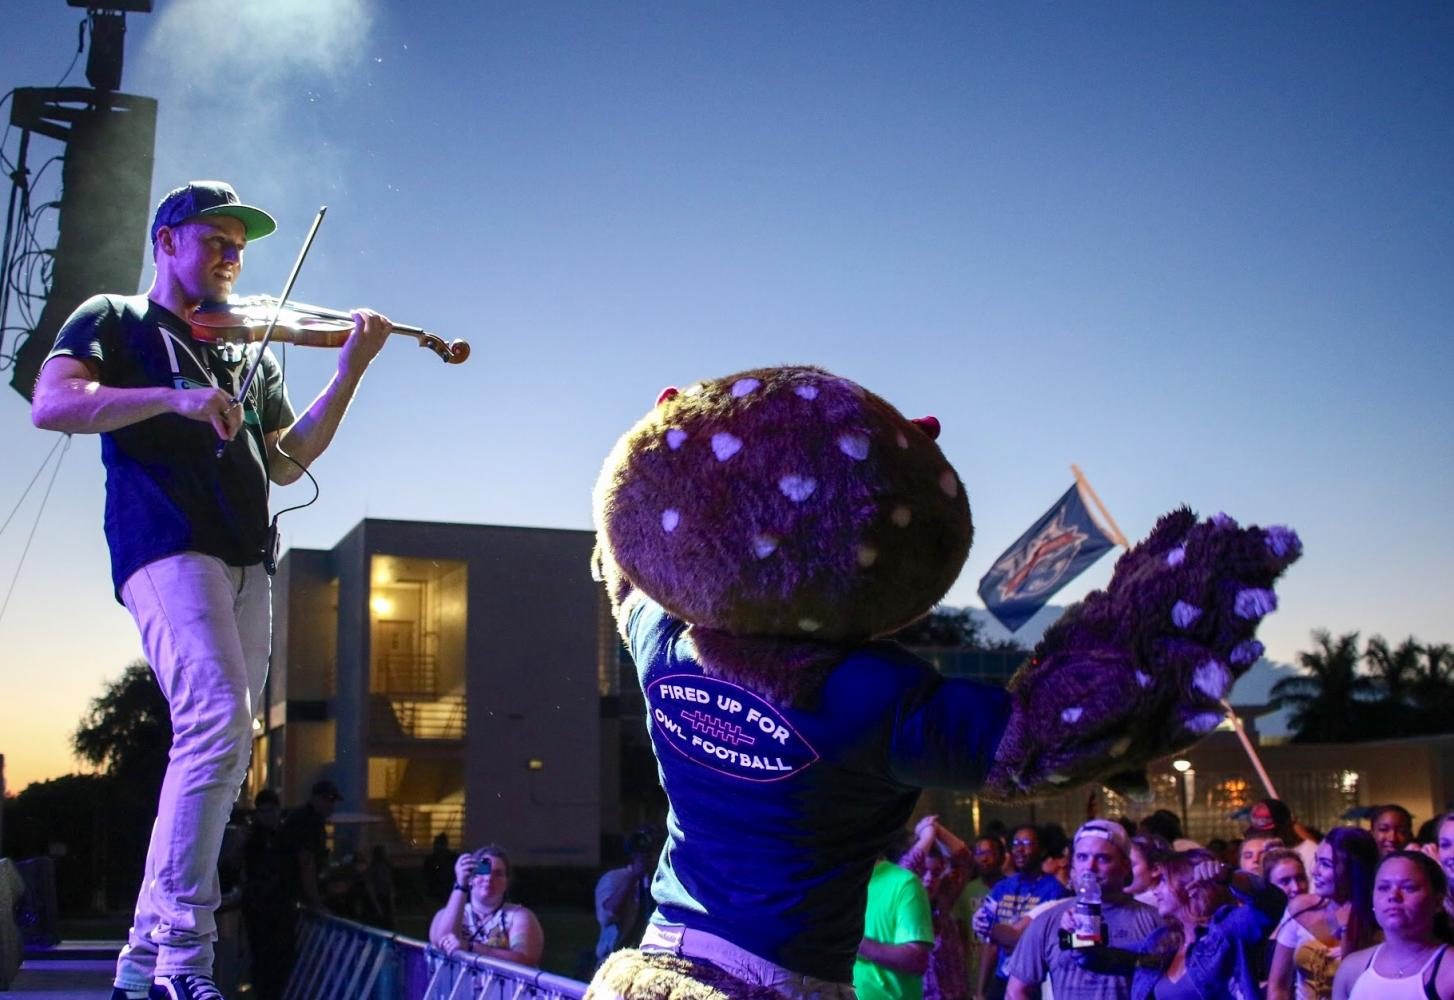 FAU’s mascot Owlsley helps the opening act, hip-hop violinist Josh Vietti, get the crowd dancing during his performance. Joshua Giron | contributing photographer.